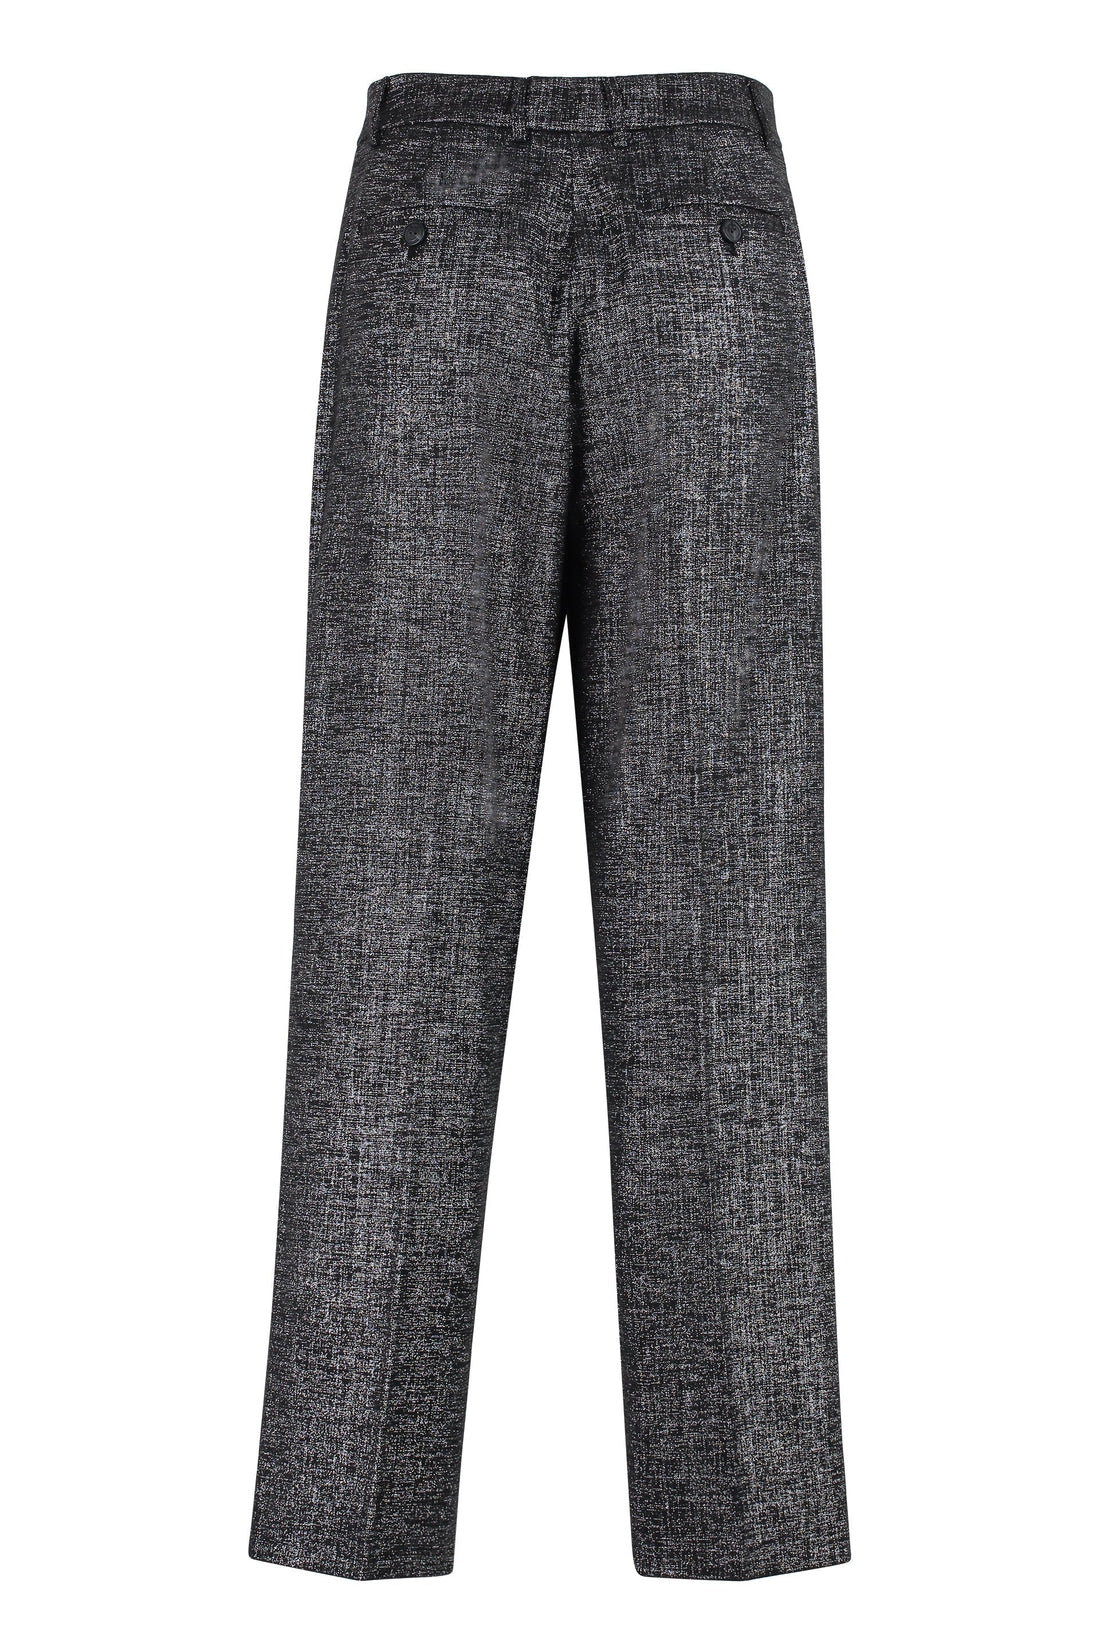 Pinko-OUTLET-SALE-Wool and cotton trousers-ARCHIVIST